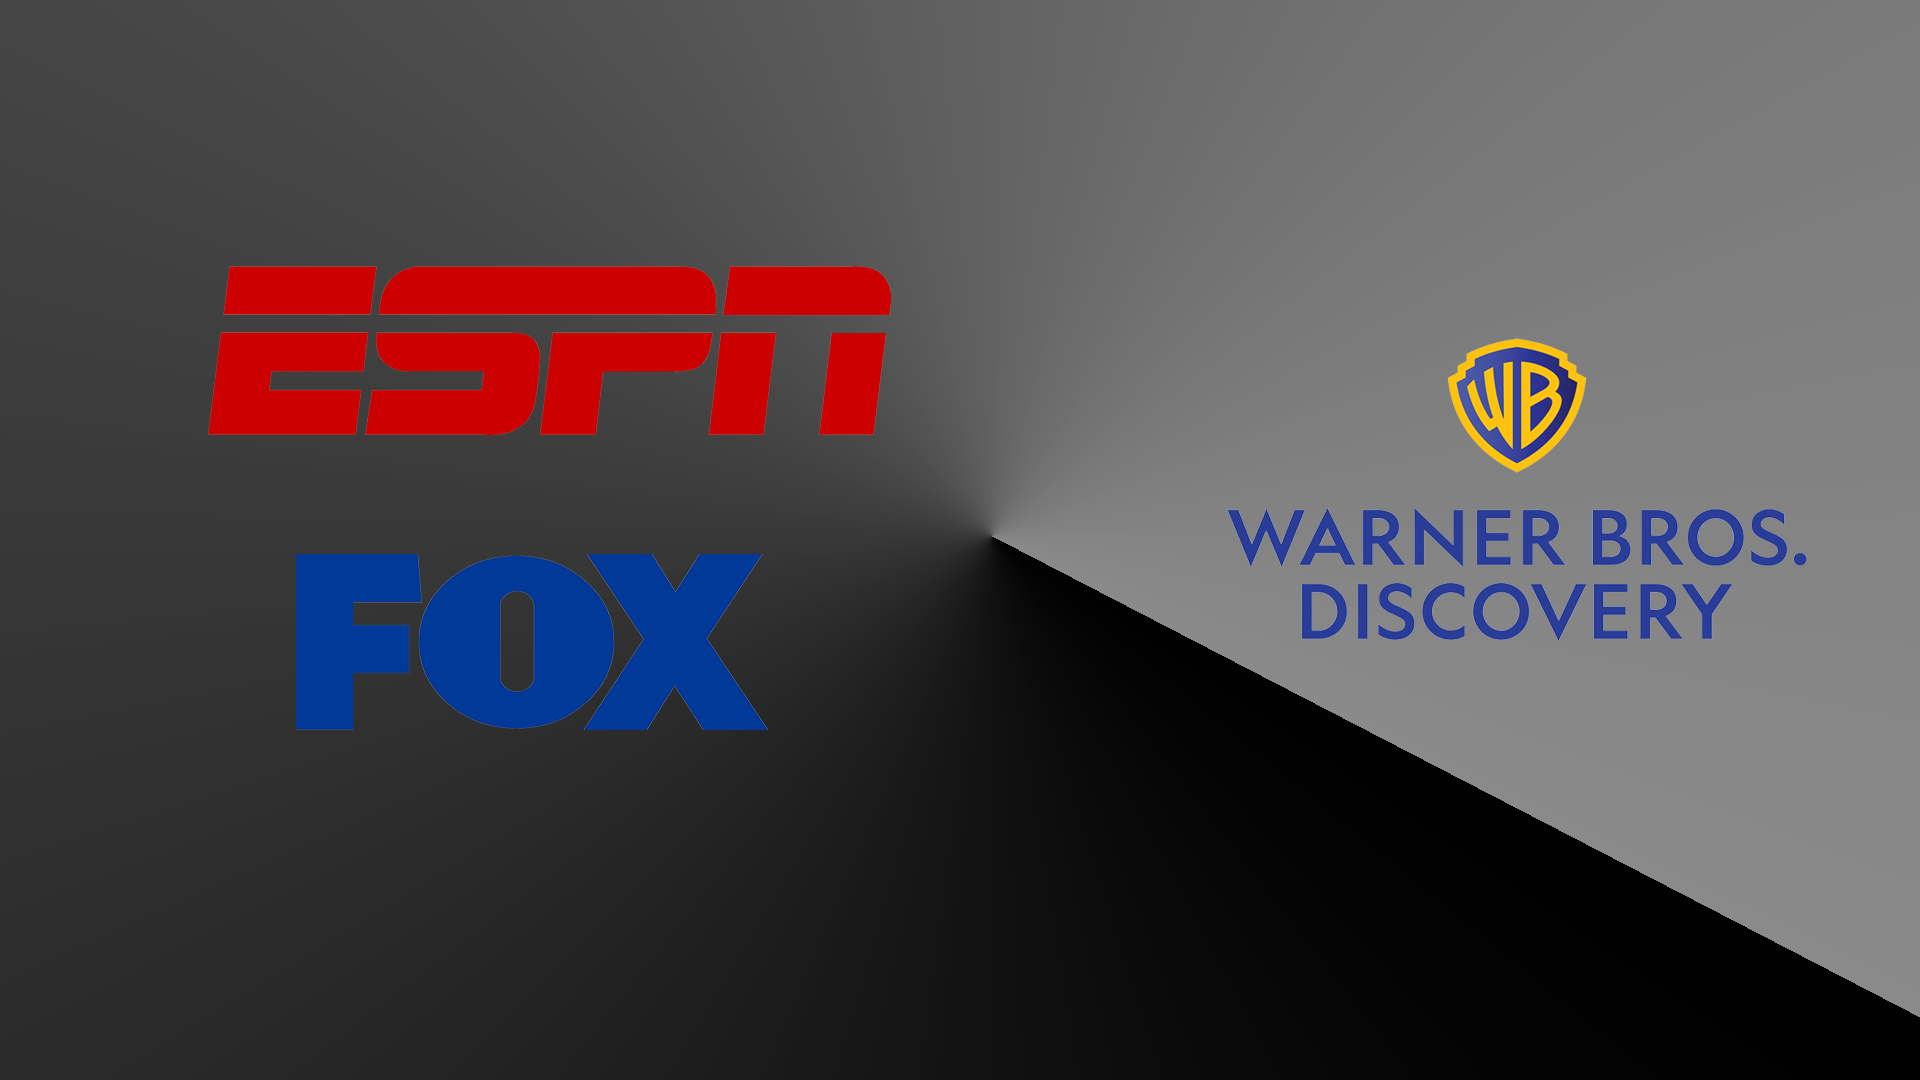 Logos for media companies ESPN, Fox and Warner Bros. Discovery